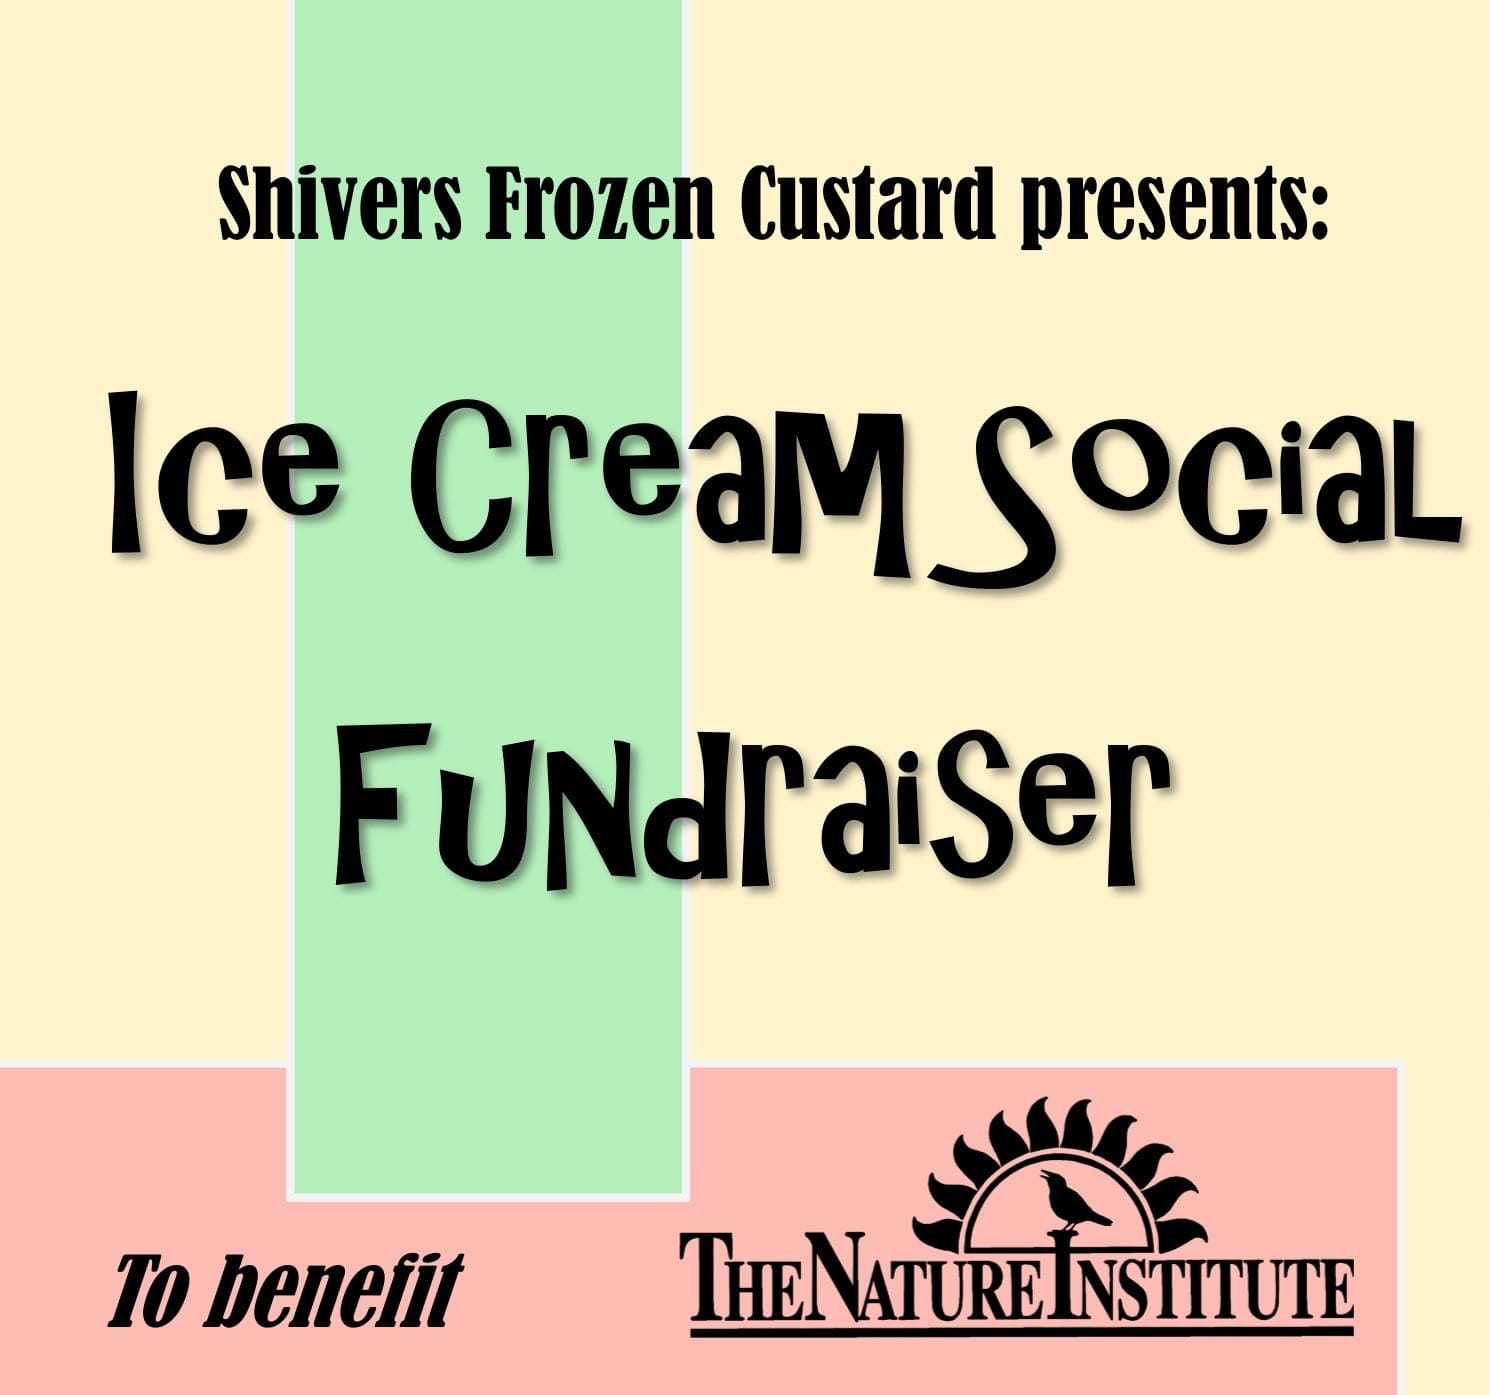 Ice Cream Social Fundraiser: presented by Shivers Frozen Custard